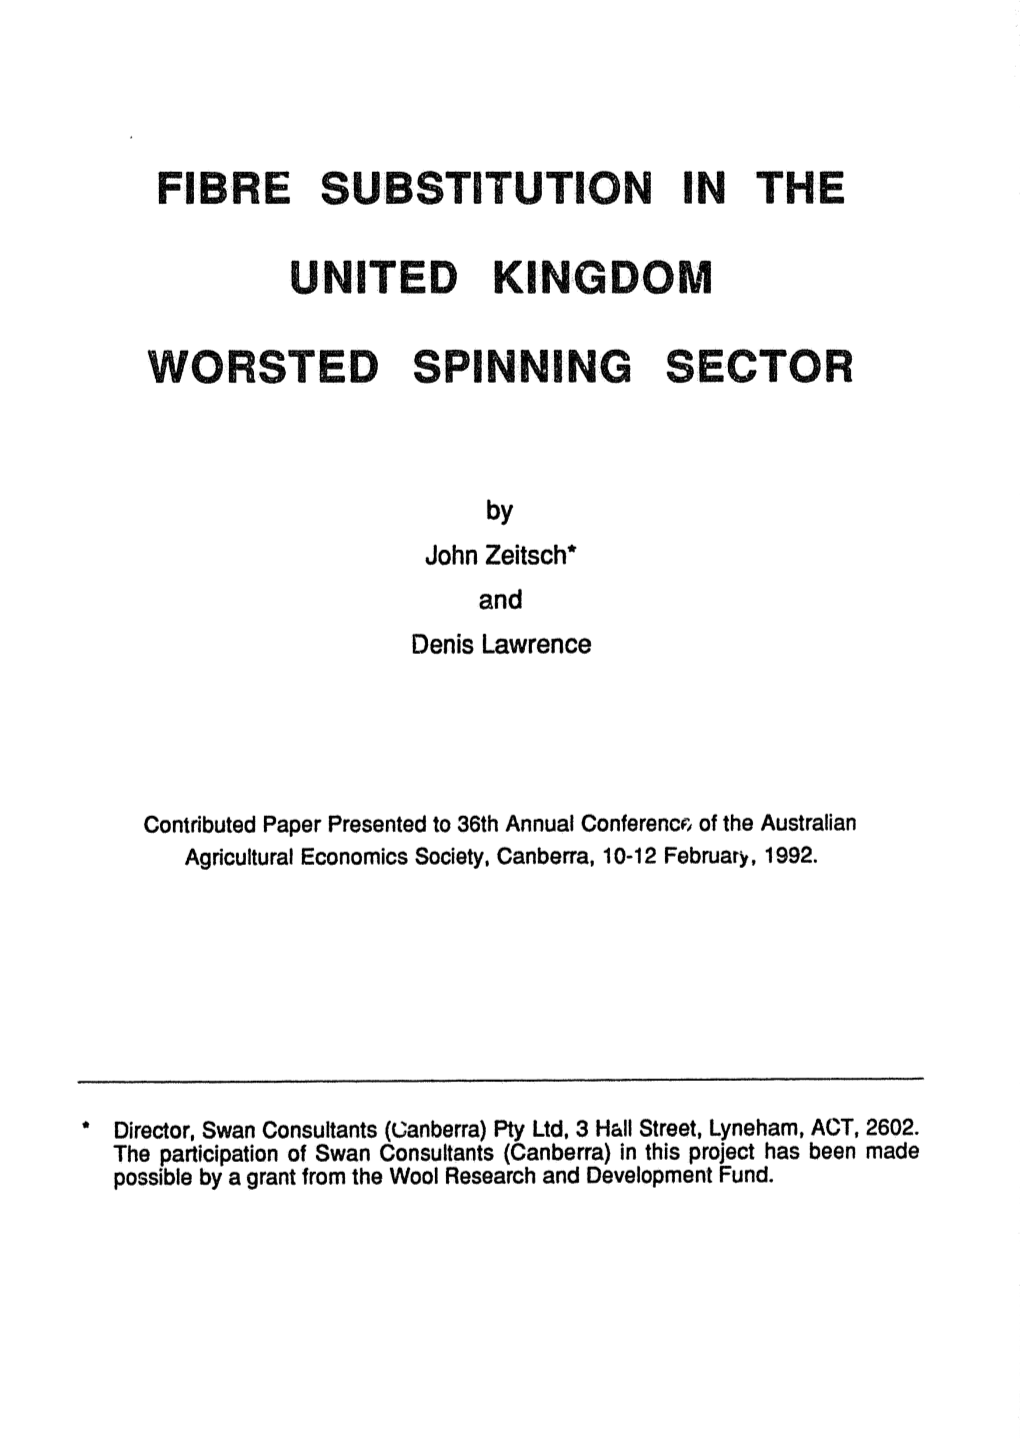 Fibre Substitution in the United Kingdom Worsted Spinning Sector